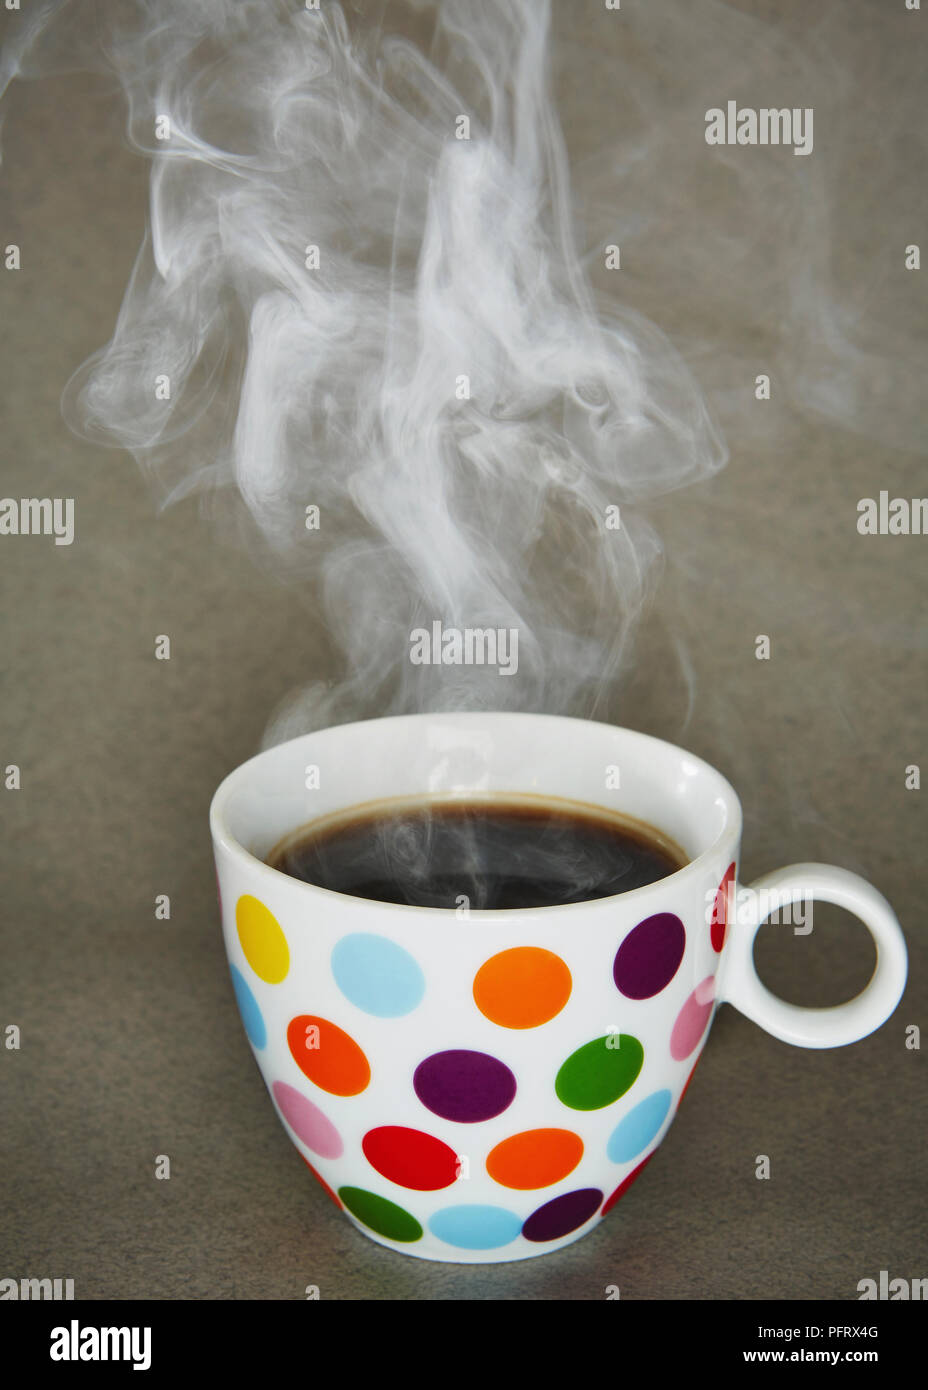 Spotty mug of a hot drink steaming Stock Photo